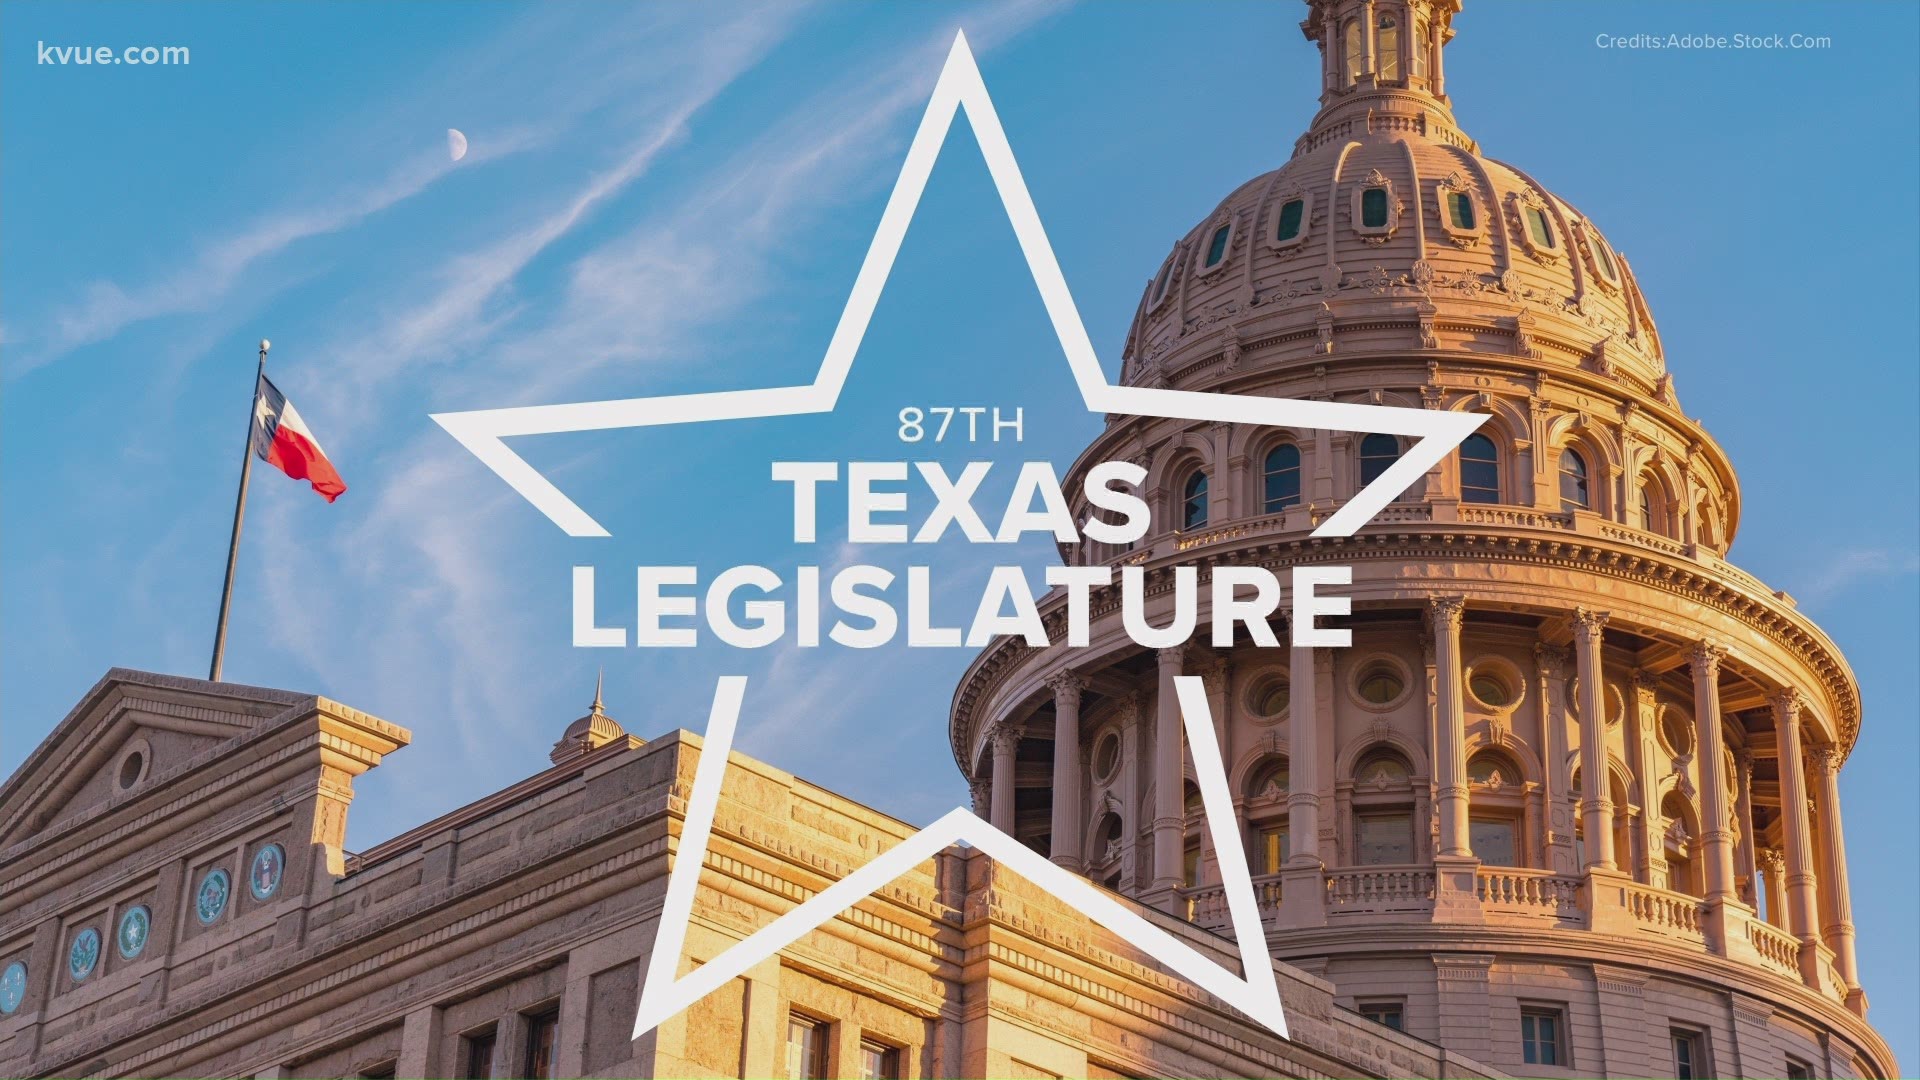 There is one week left of the 87th Texas Legislature.